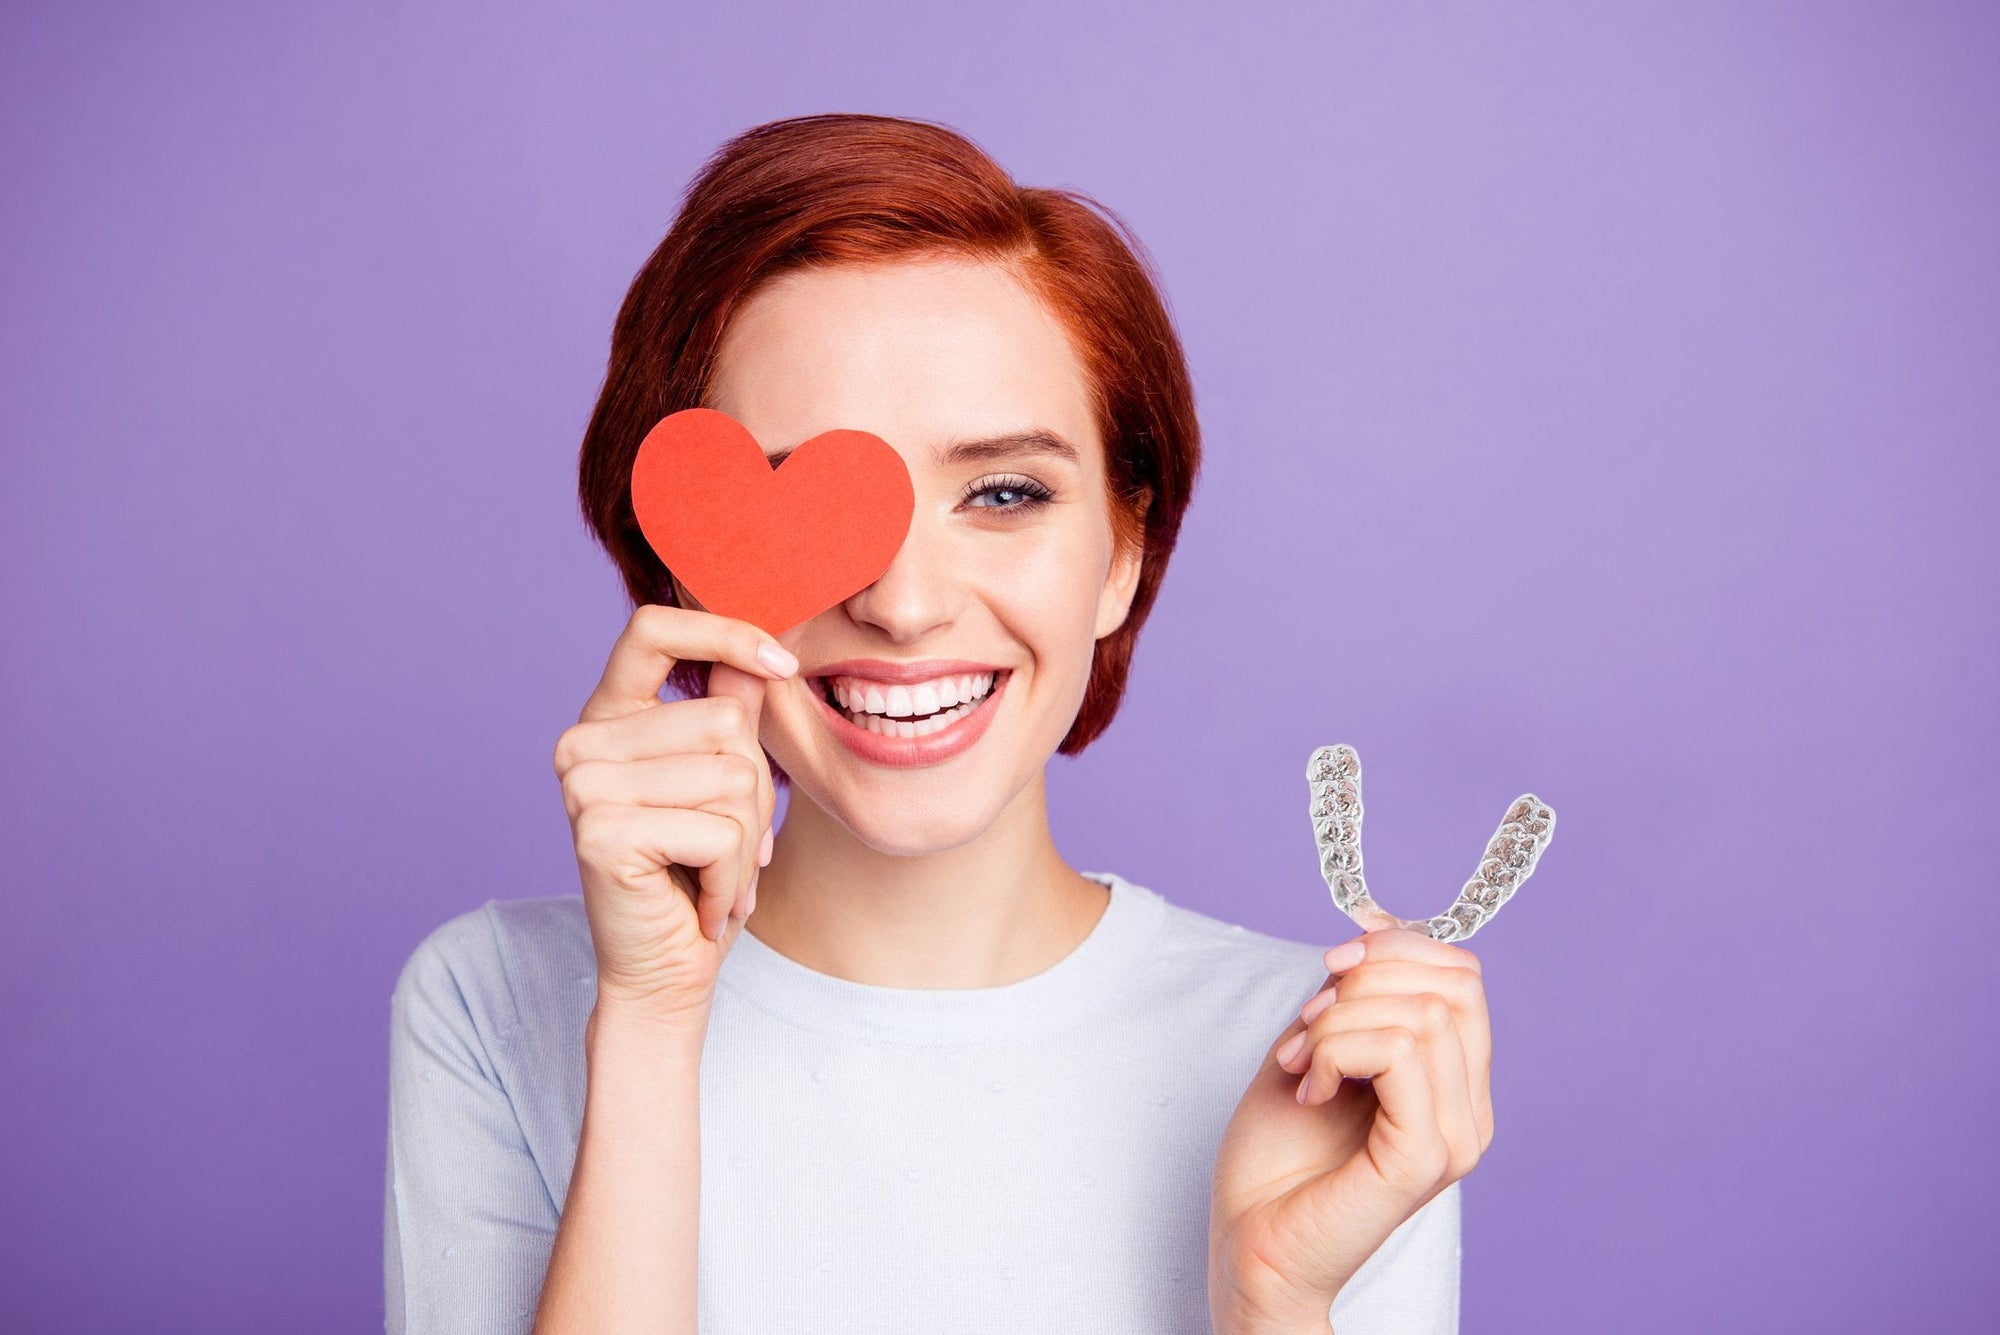 NewSmile® Clear Aligners | Is Teeth Straightening For Me?